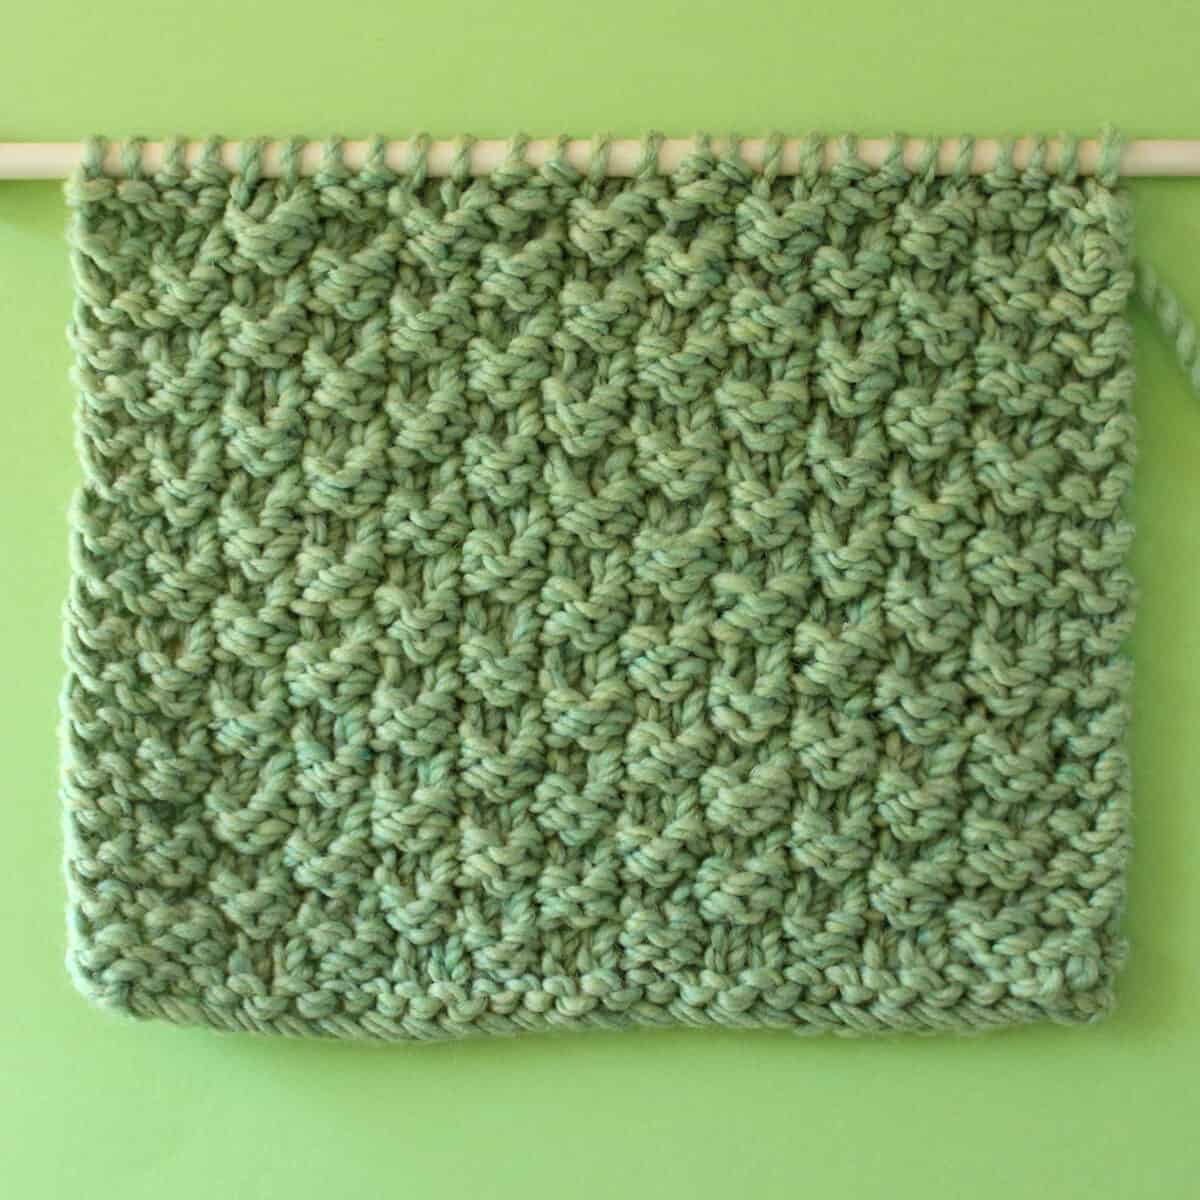 Double Moss Stitch texture on knitting needle in green color yarn.